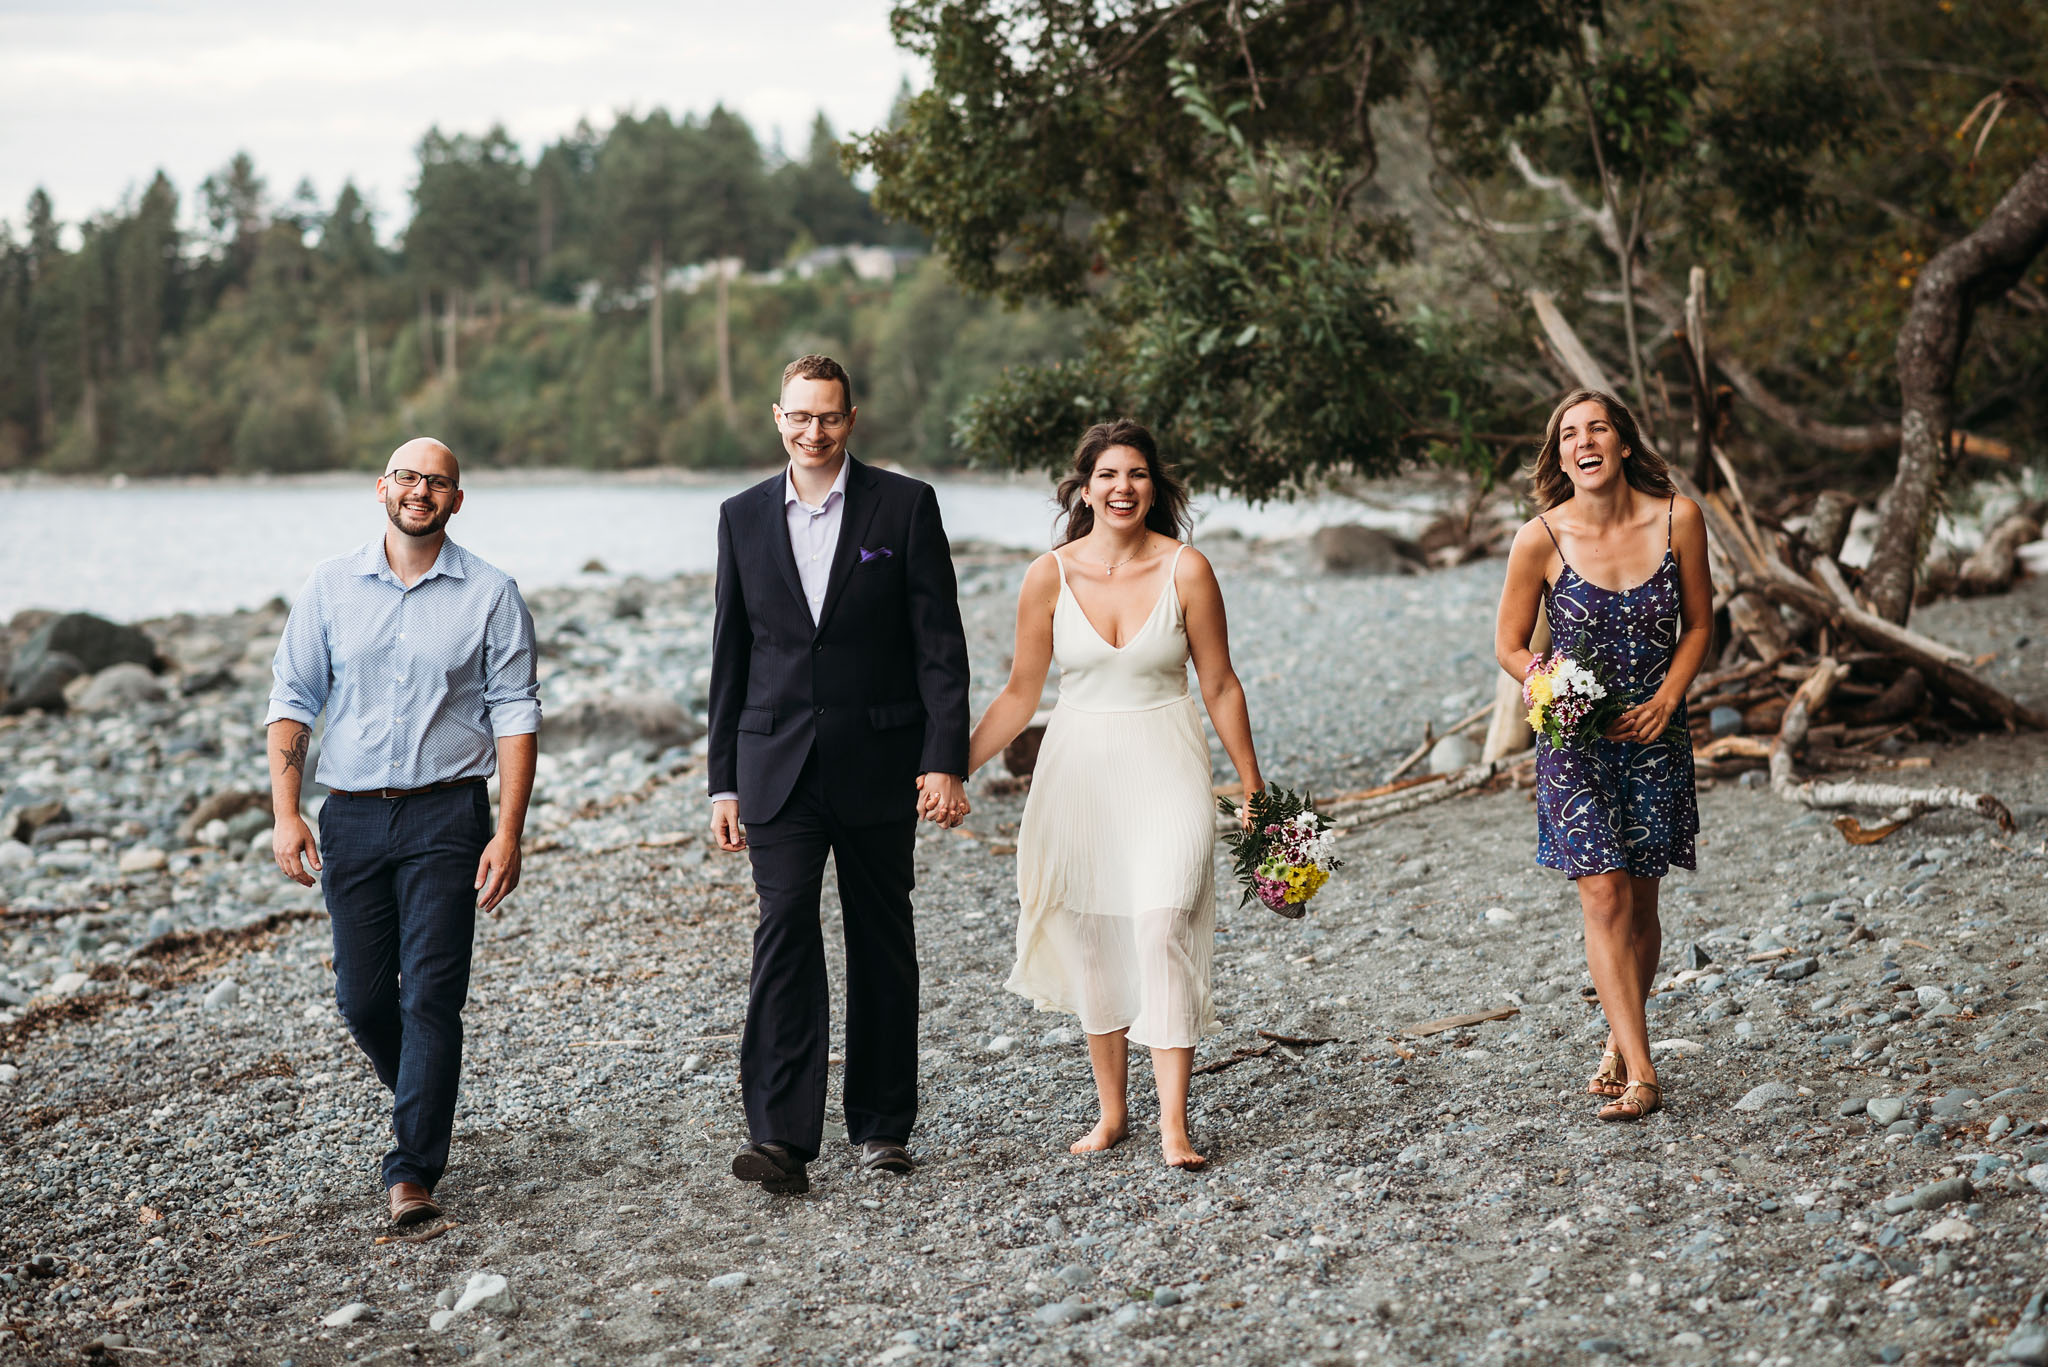 Bride and groom walking along beach with their two witnesses after eloping at Seal Bay Park in the Comox Valley.